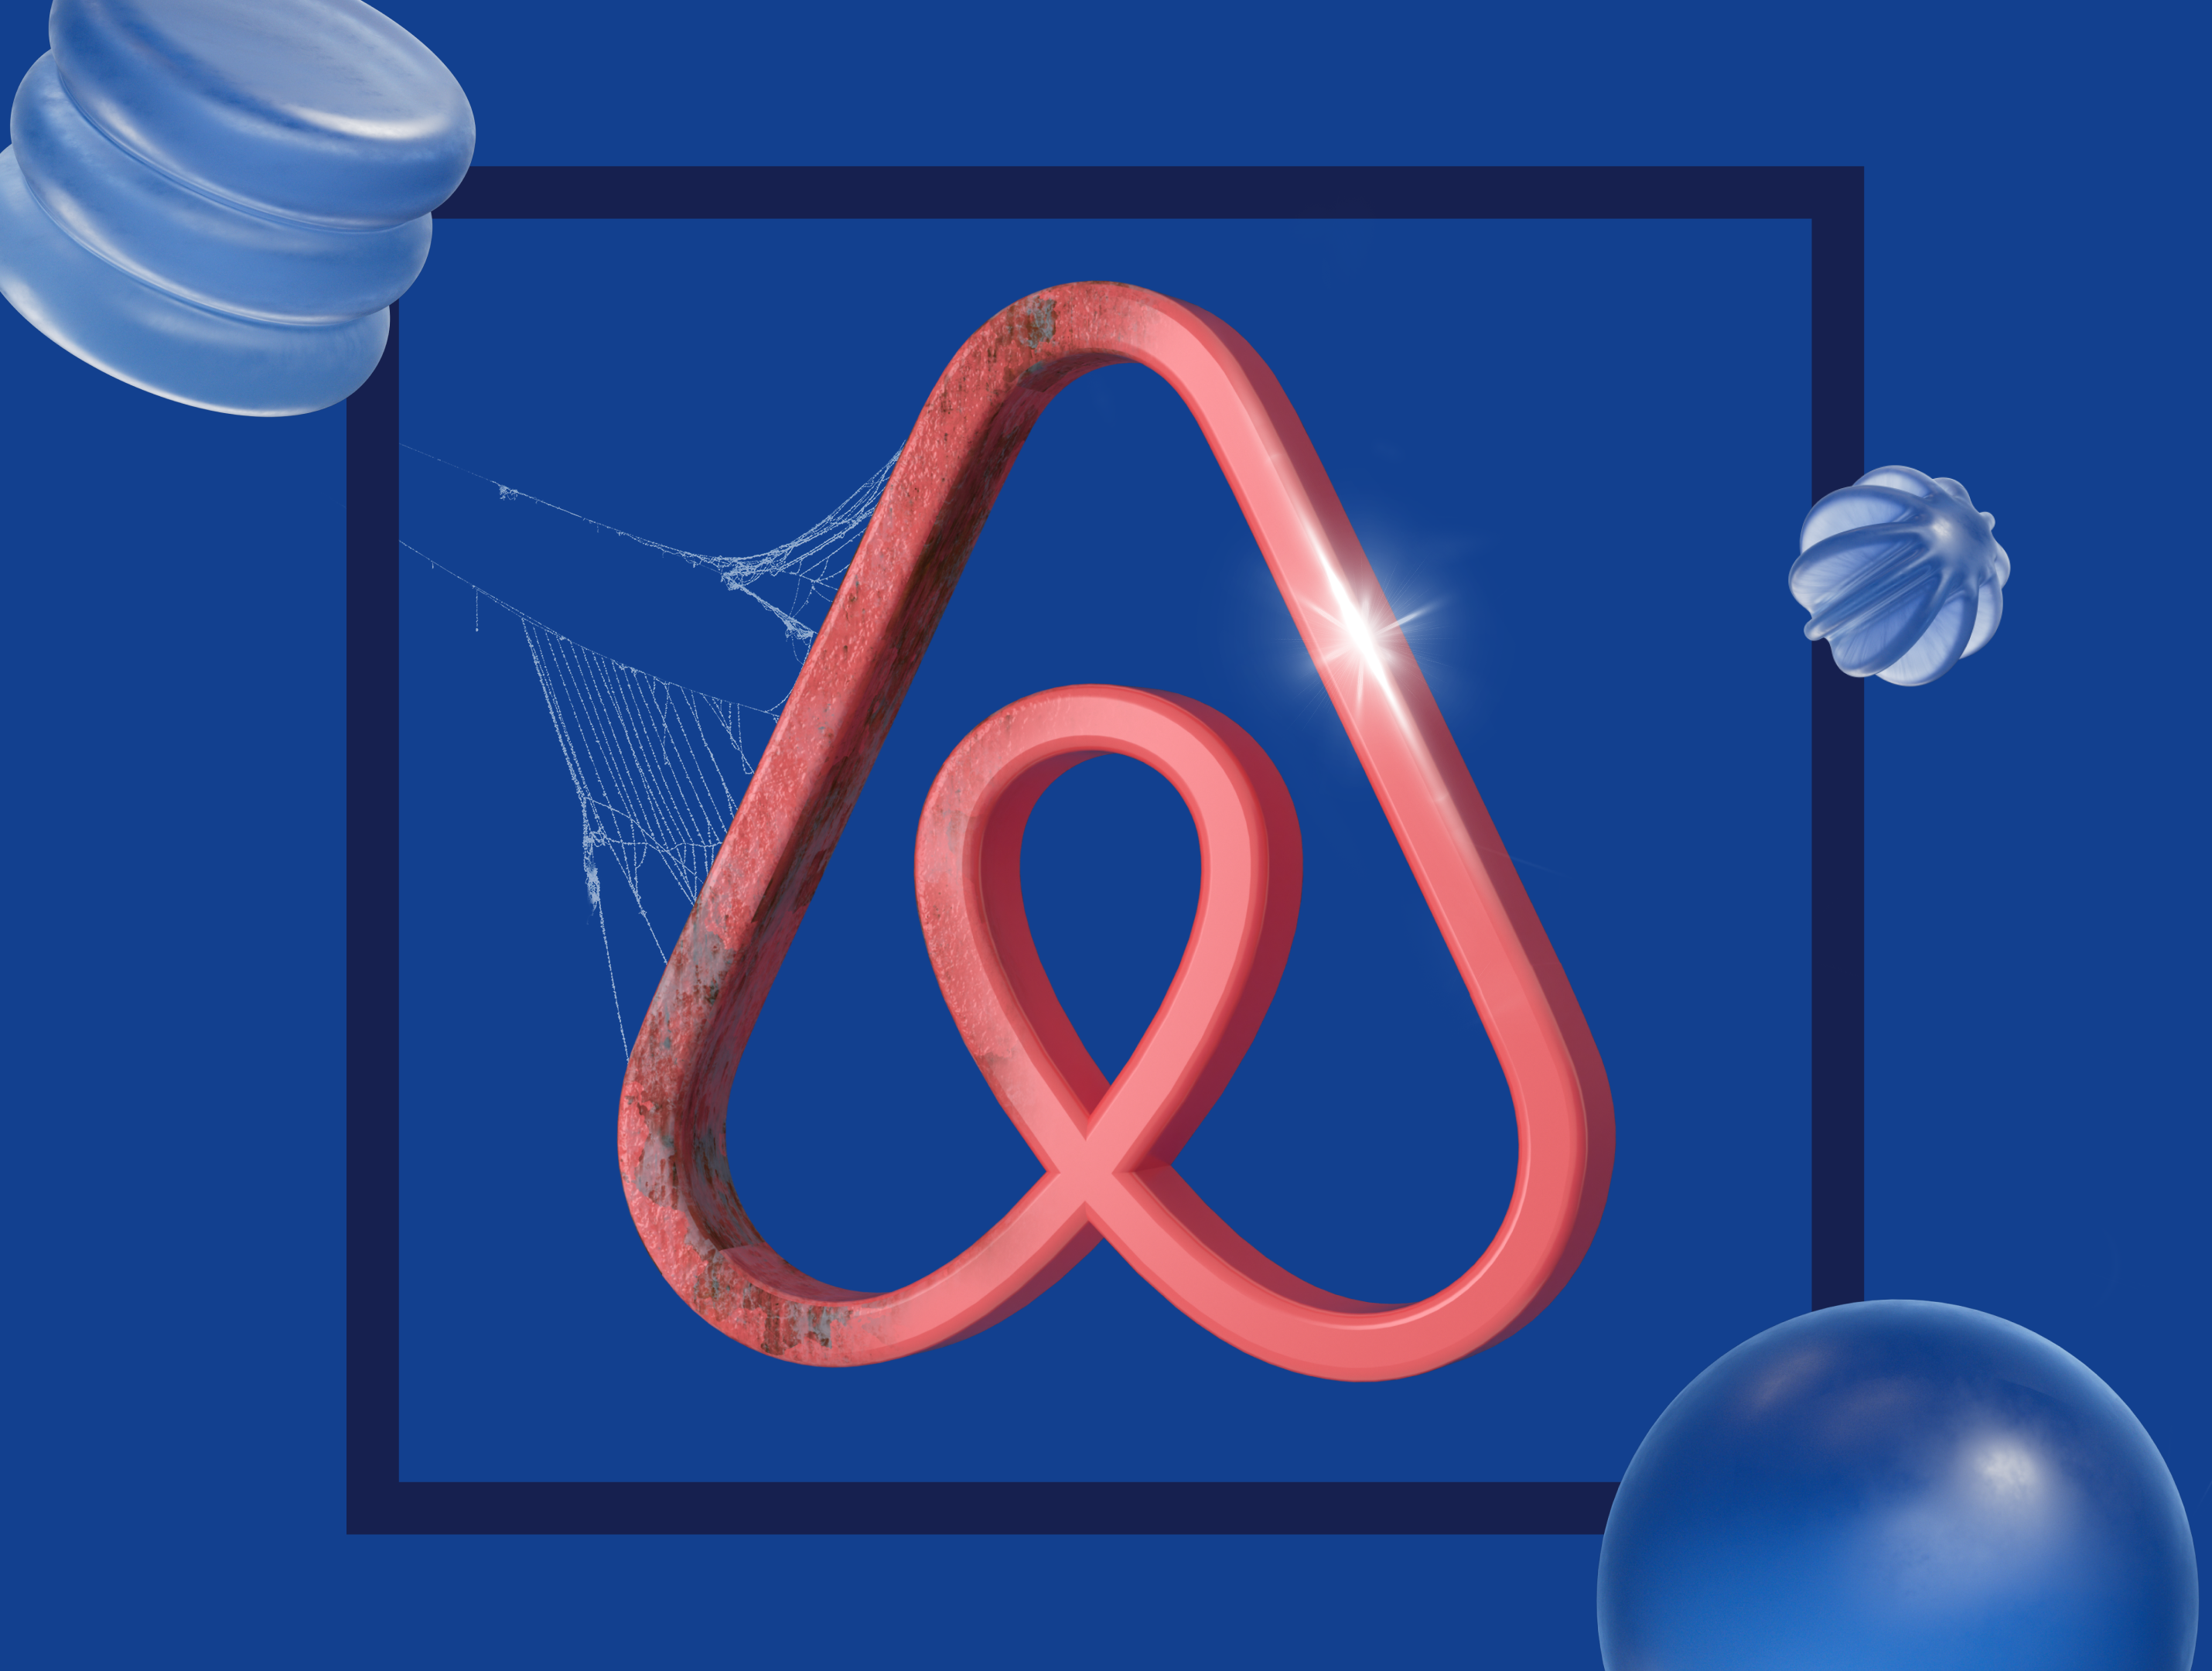 Airbnb’s Financial Dip: Will June Mark the Rebound?